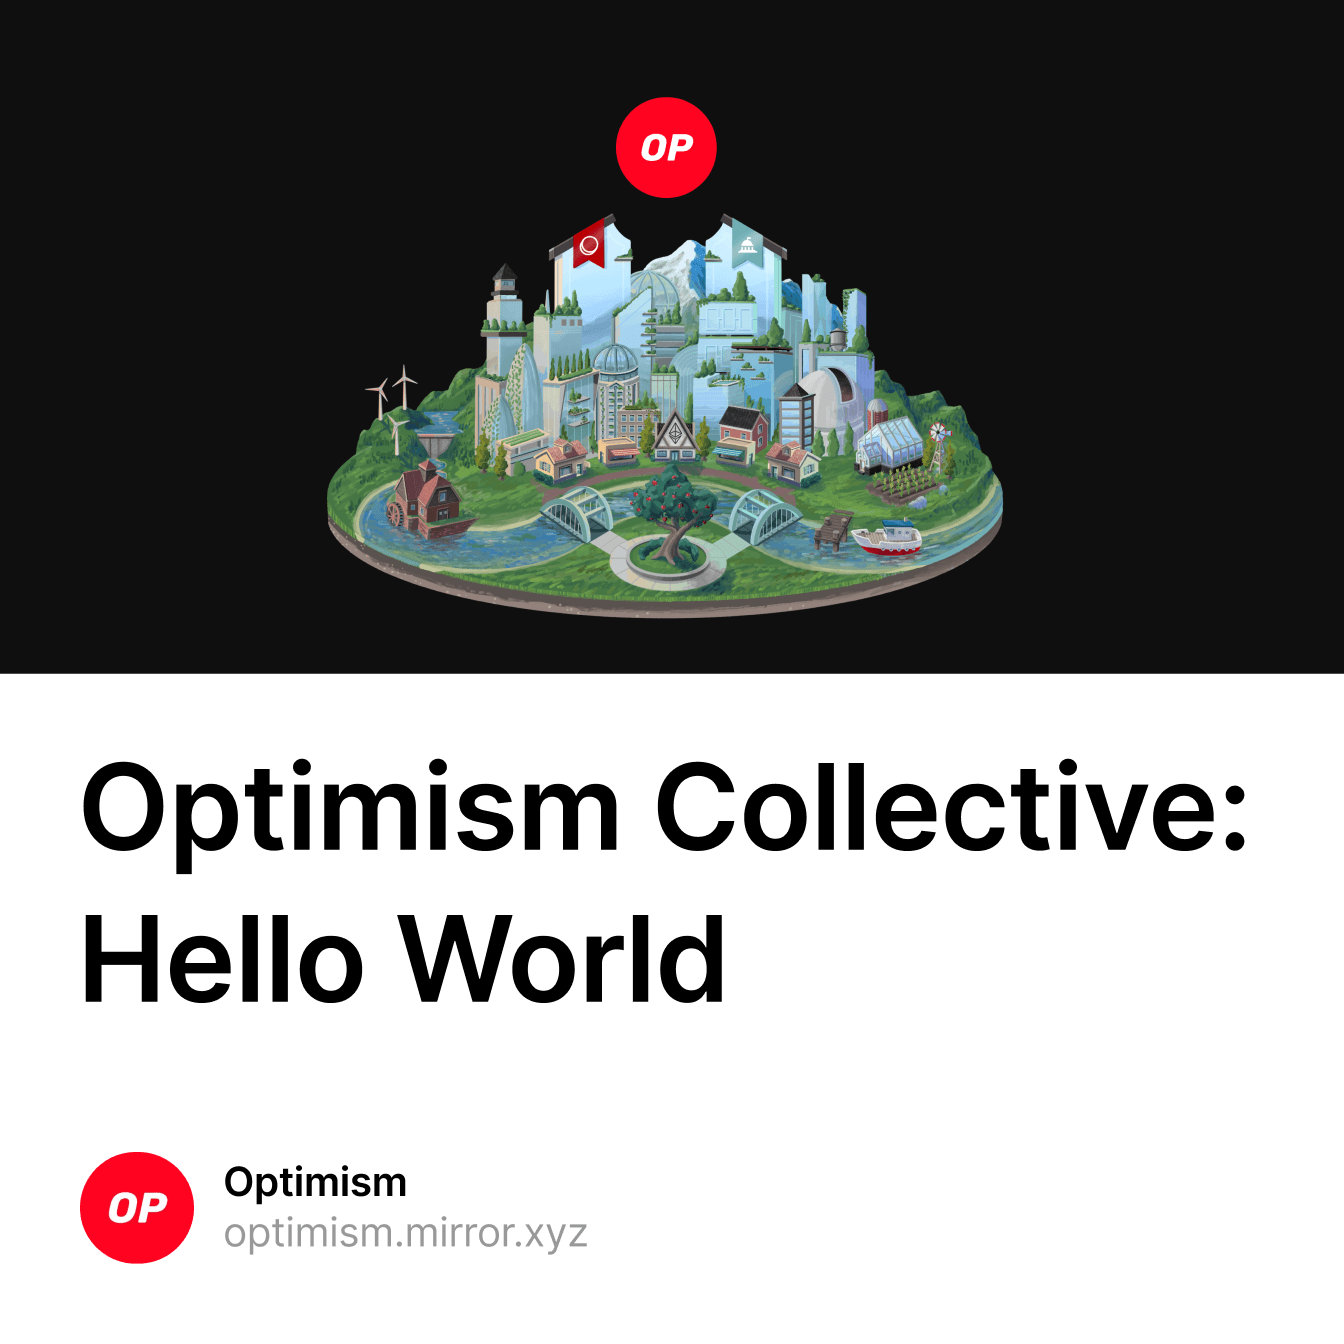 Introducing the Optimism Collective 6414/524120